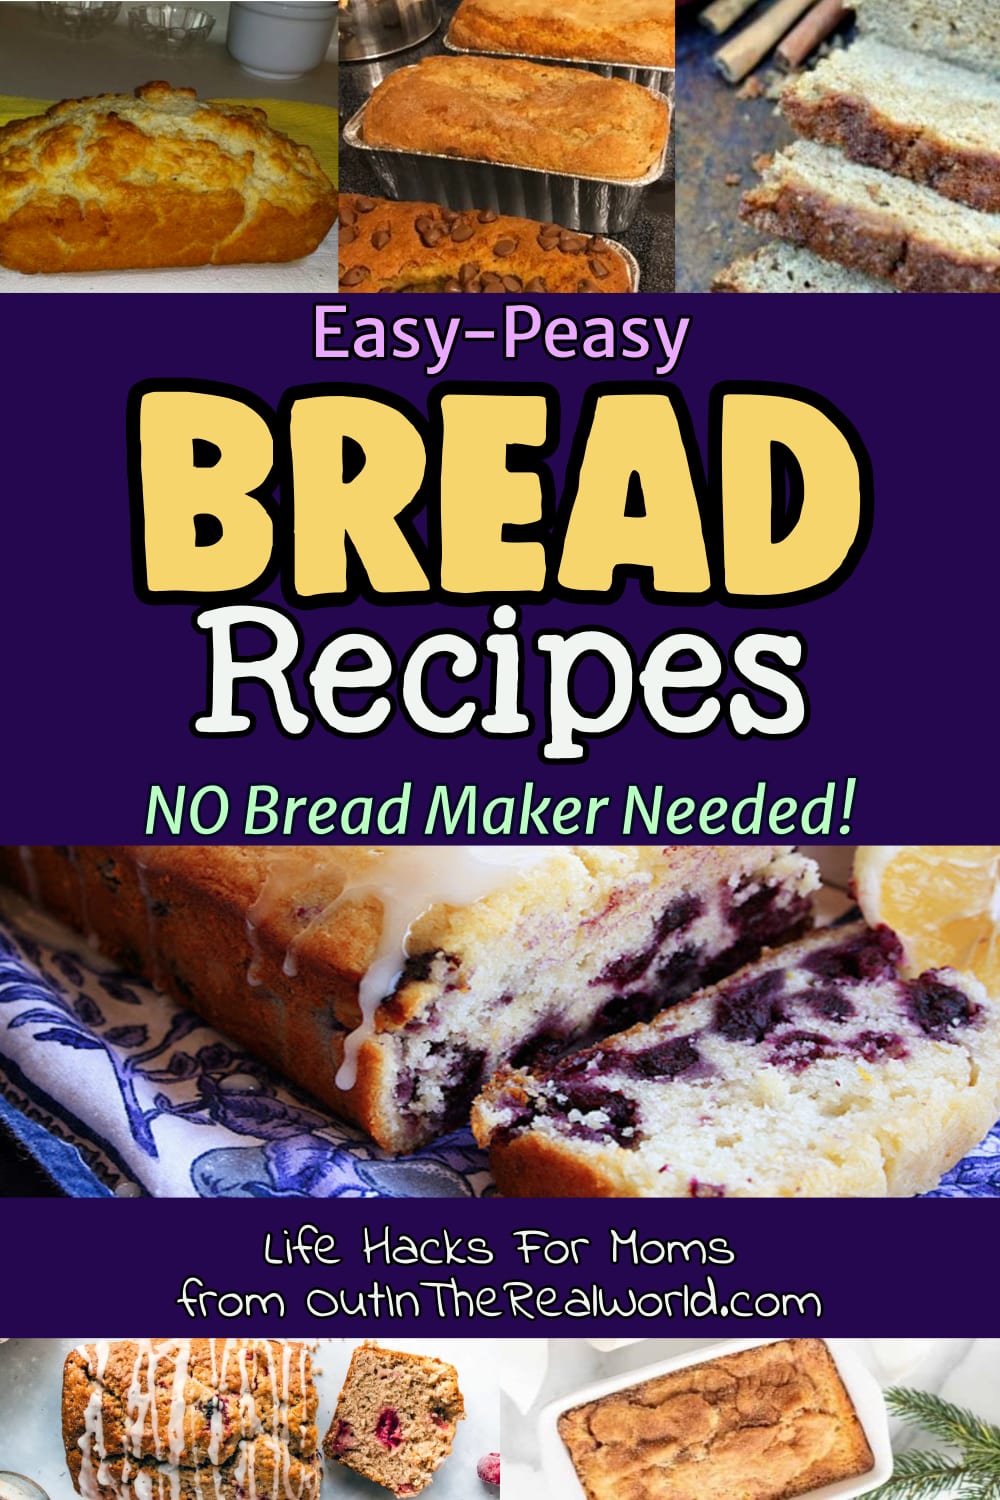 Different types of Bread Recipes to try - Make Bread WITHOUT a Bread Machine. 8 easy homemade bread recipes with few ingredients - no bread maker needed. Breakfast bread, beer bread, 3 ingredient banana bread without cake mix and with, 4 ingredient homemade bread and bread recipes for Christmas gifts. Printable bread recipes too